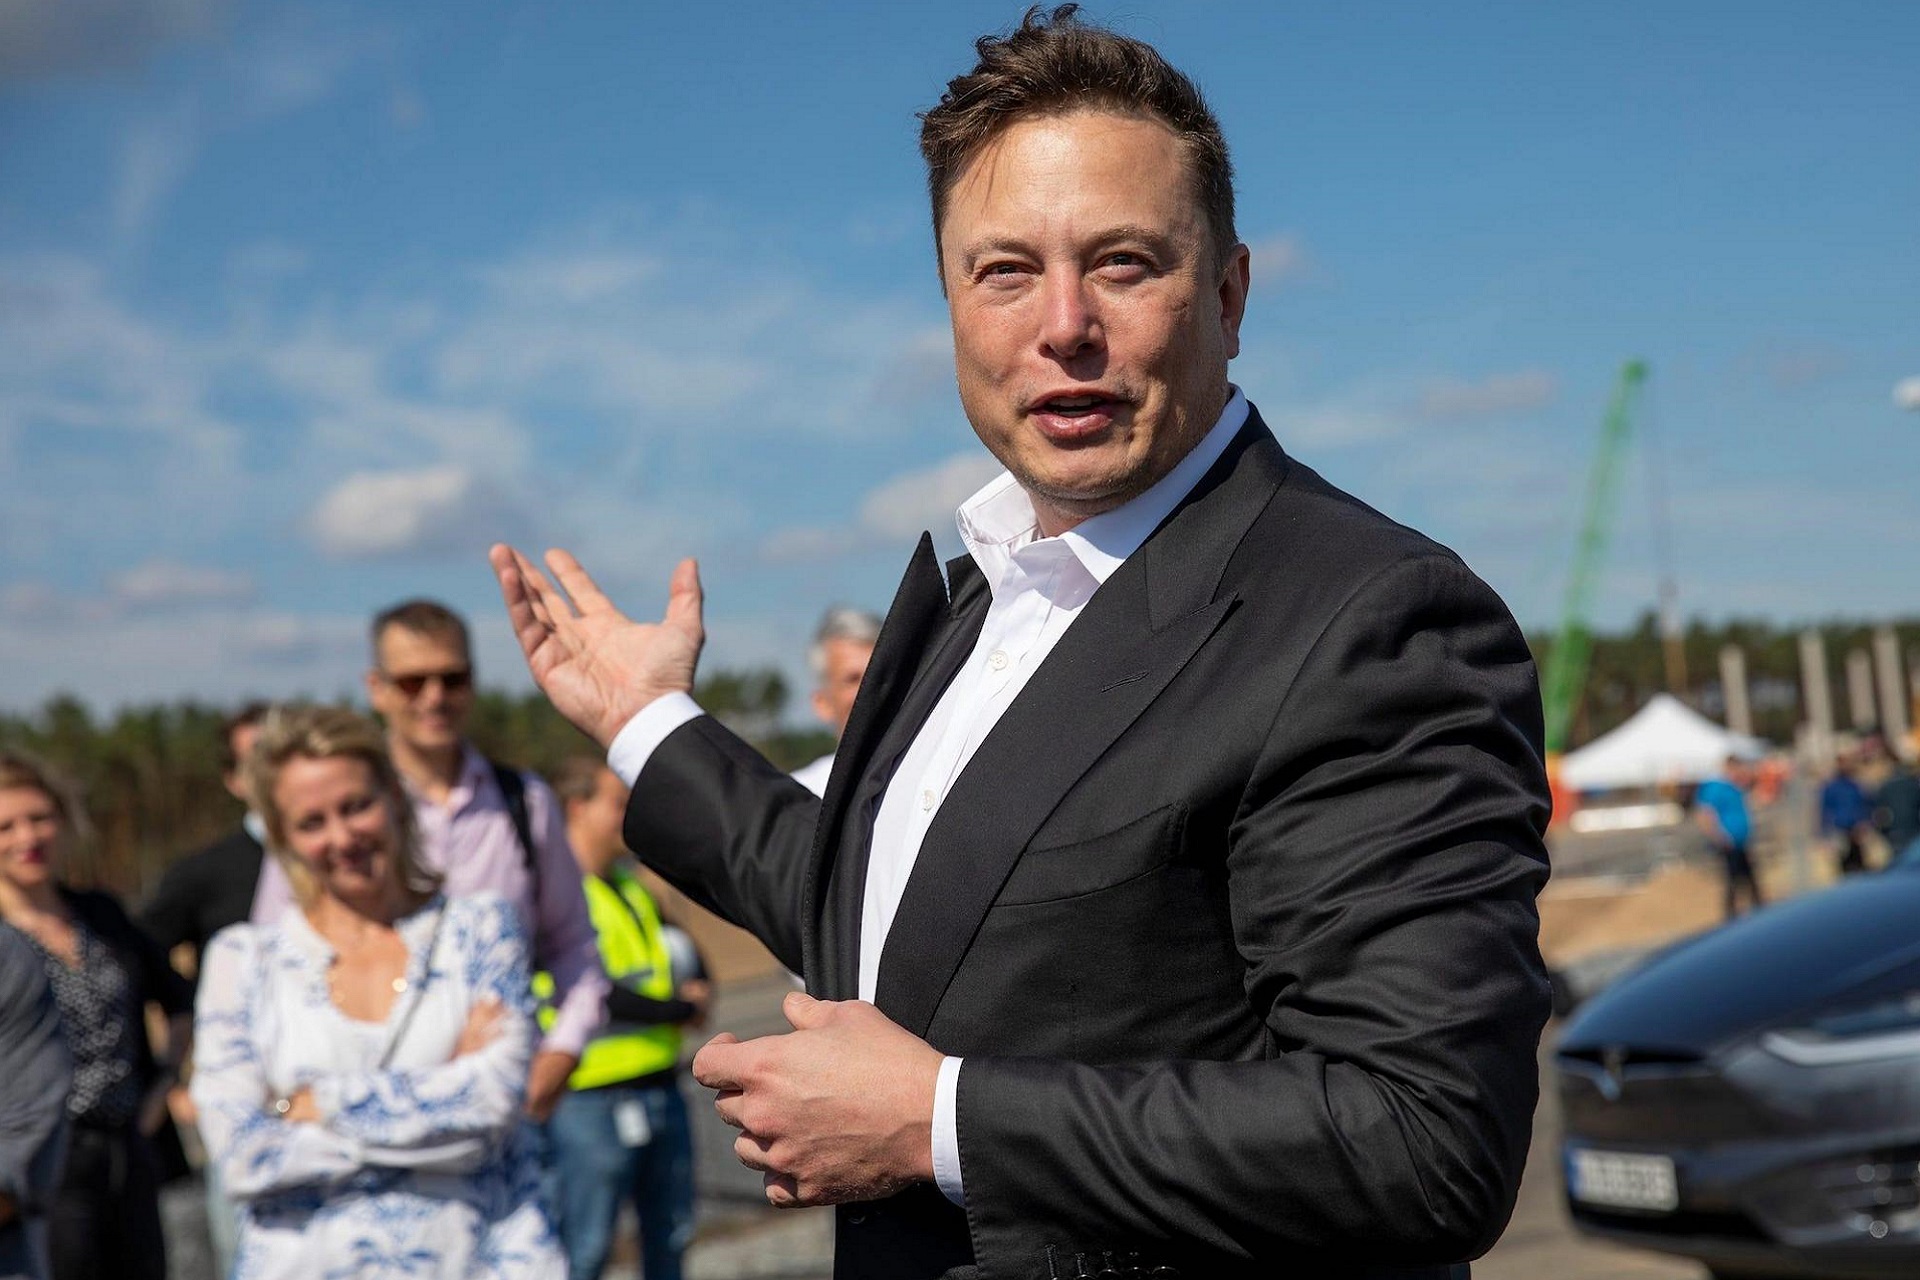 These States Are Inviting Elon Musk's Tesla To Manufacture But Here Is The Real Issue